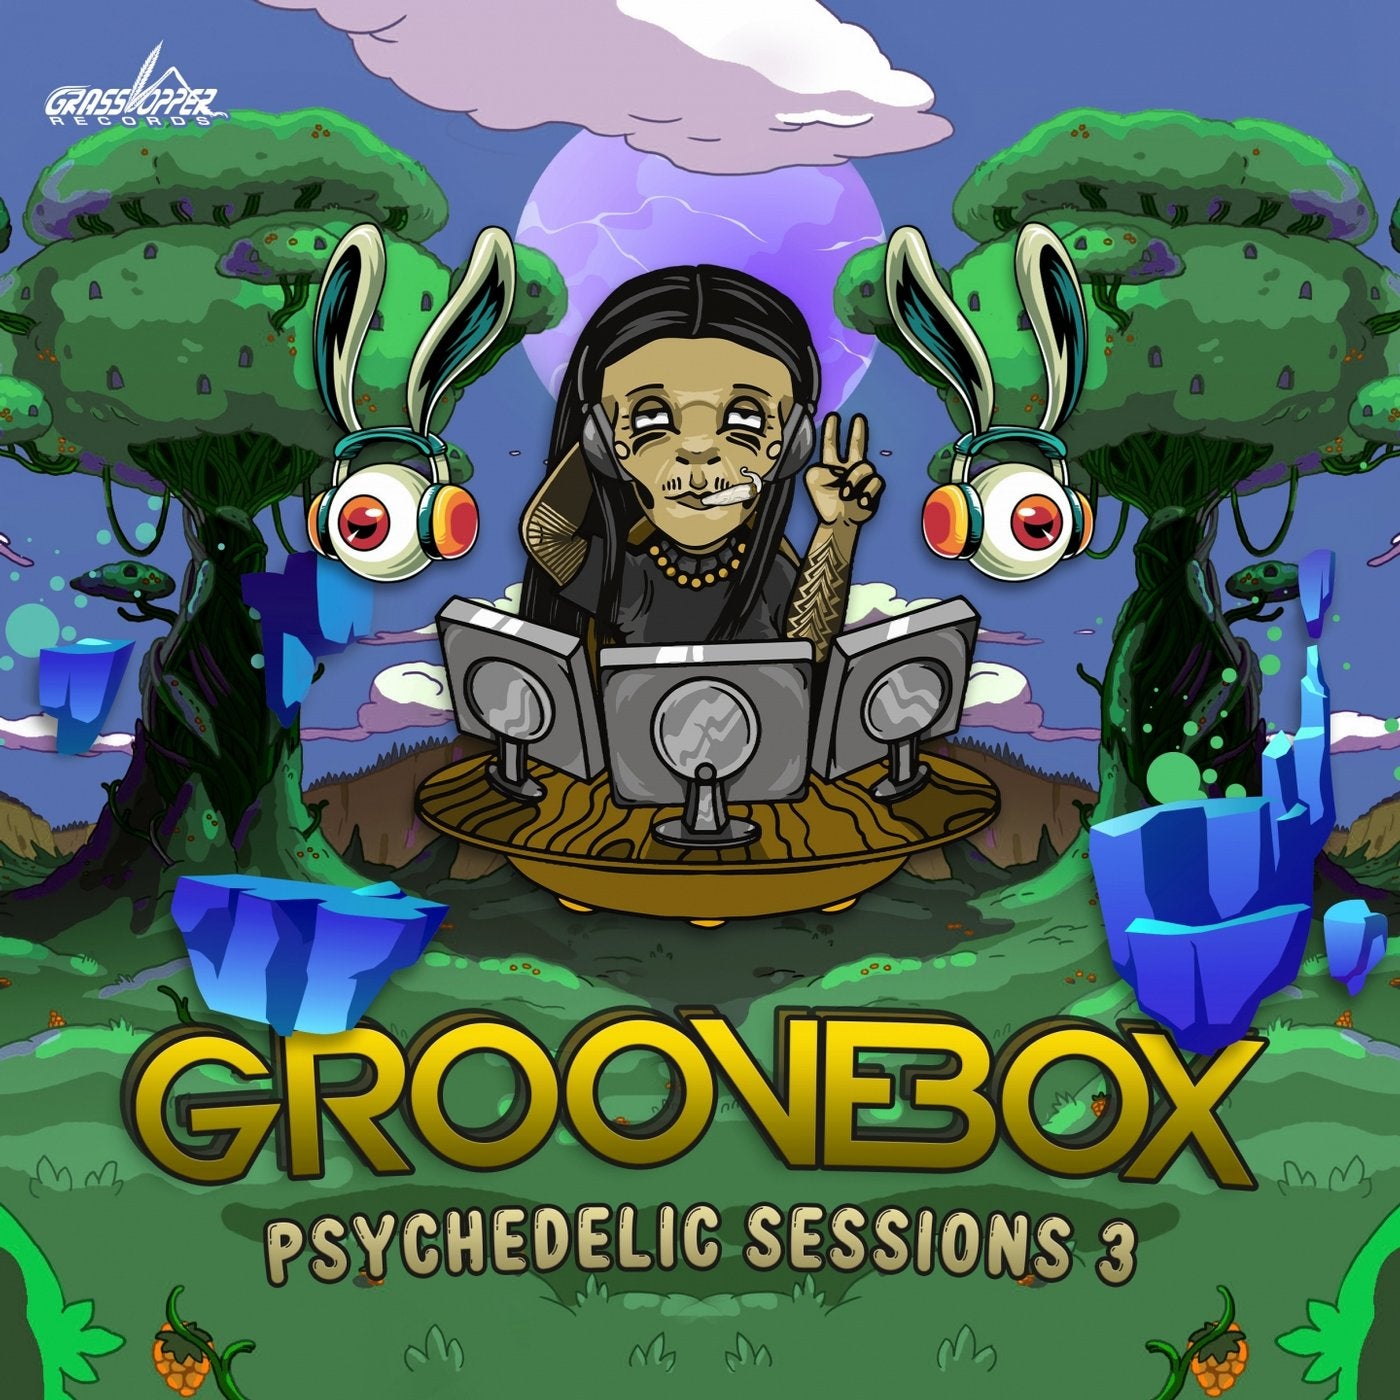 Psychedelic Sessions 3